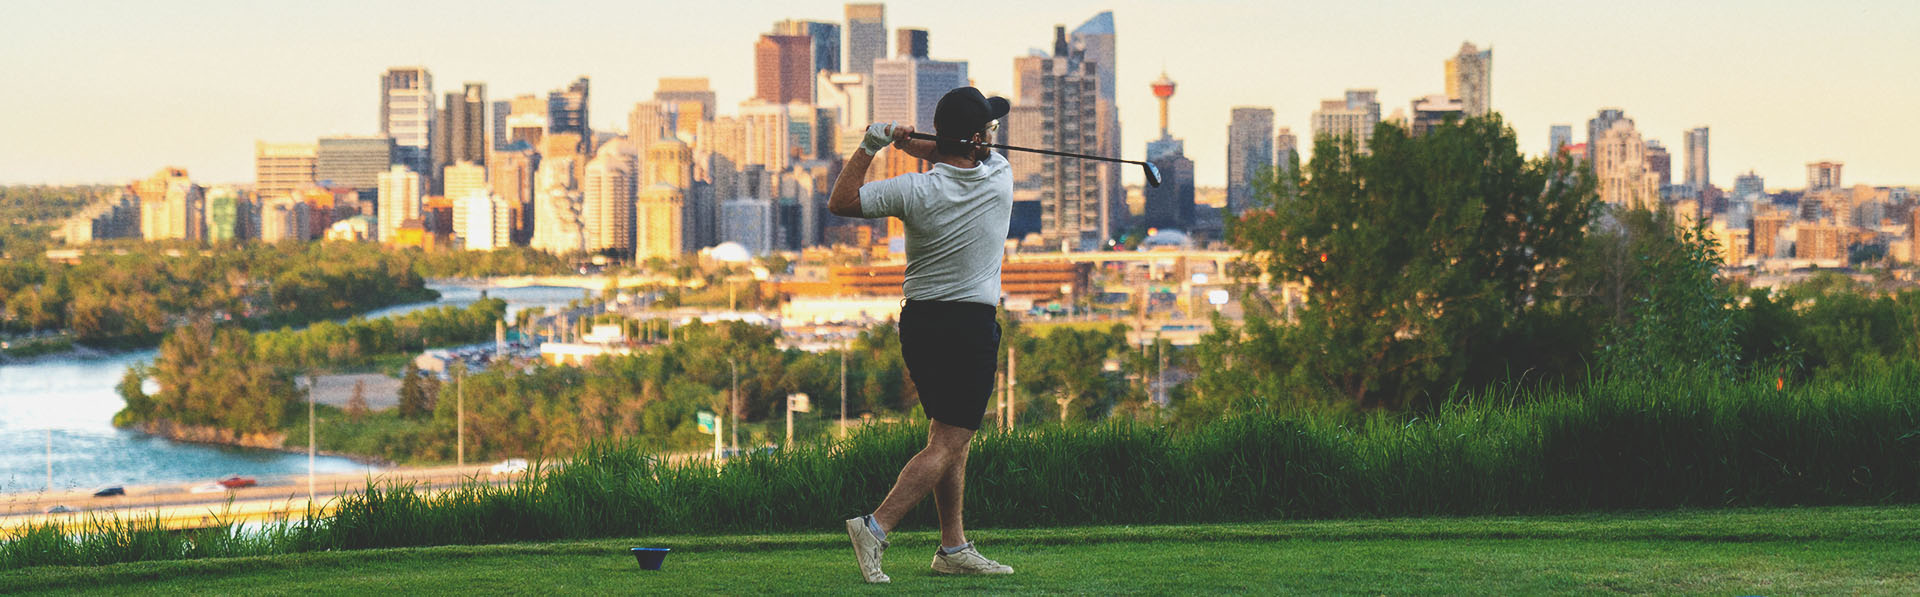 golfer taking a swing at Shaganappi Point Golf Course with the skyline in the background